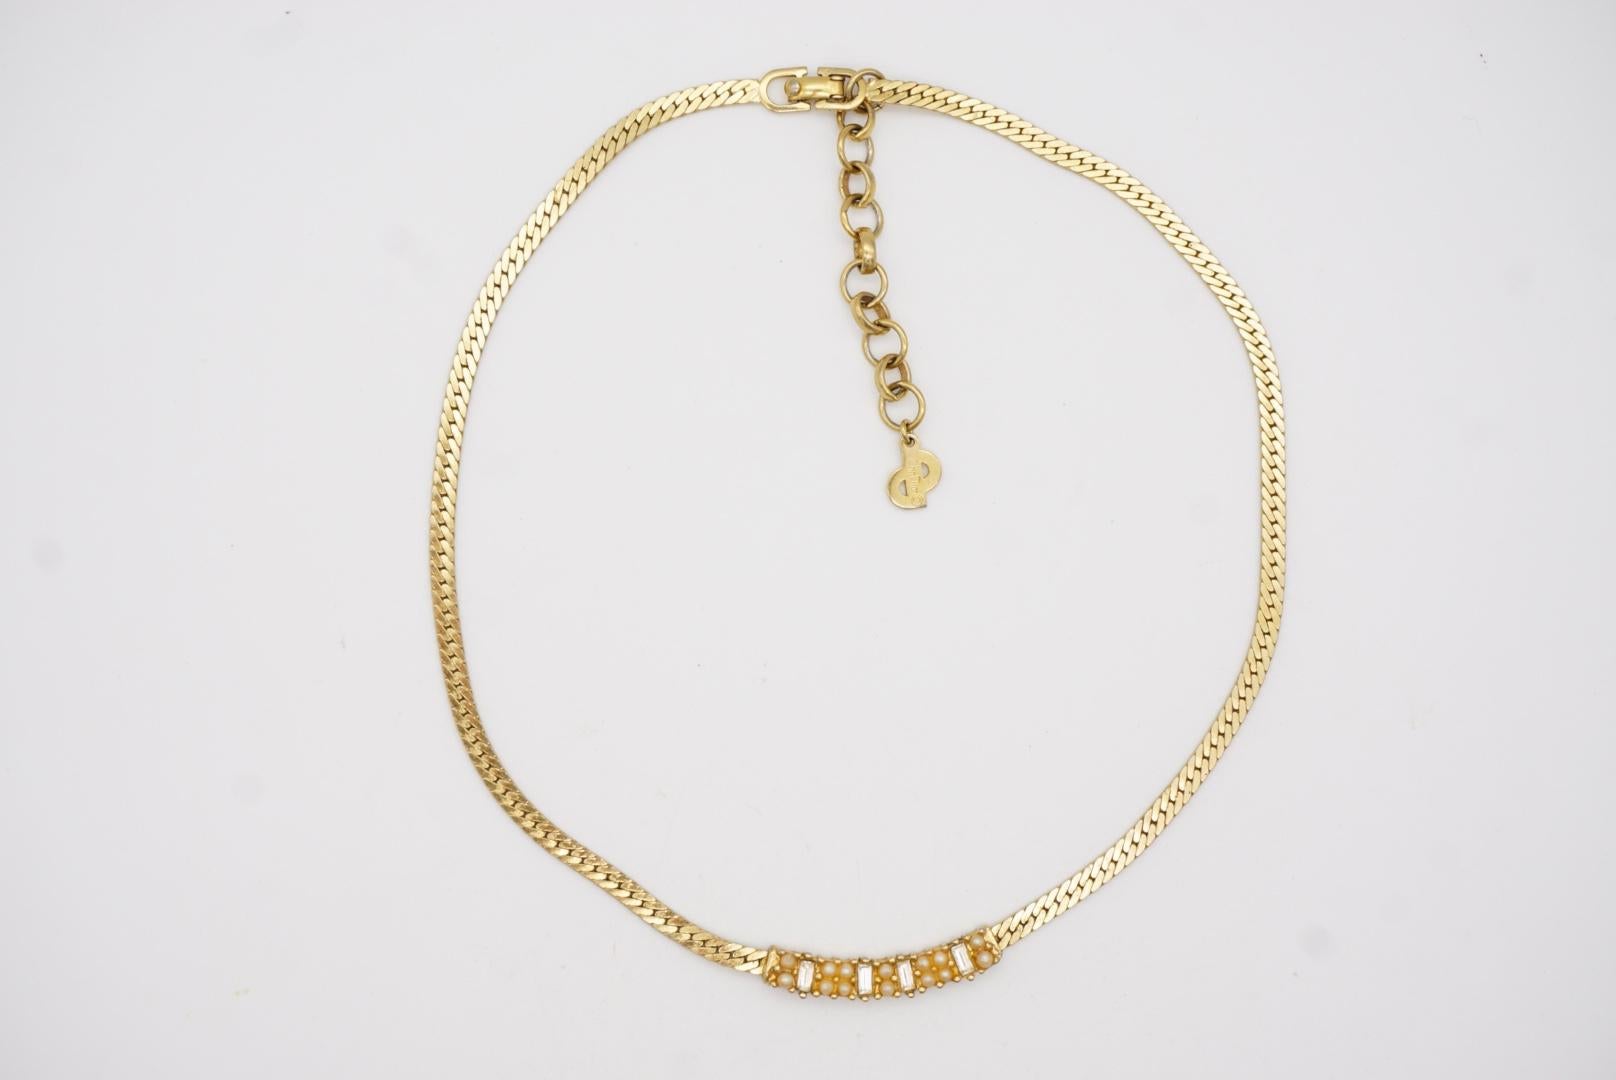 Christian Dior Vintage 1970s Beaded Pearls Crystals Long Bar Pendant Necklace For Sale 3